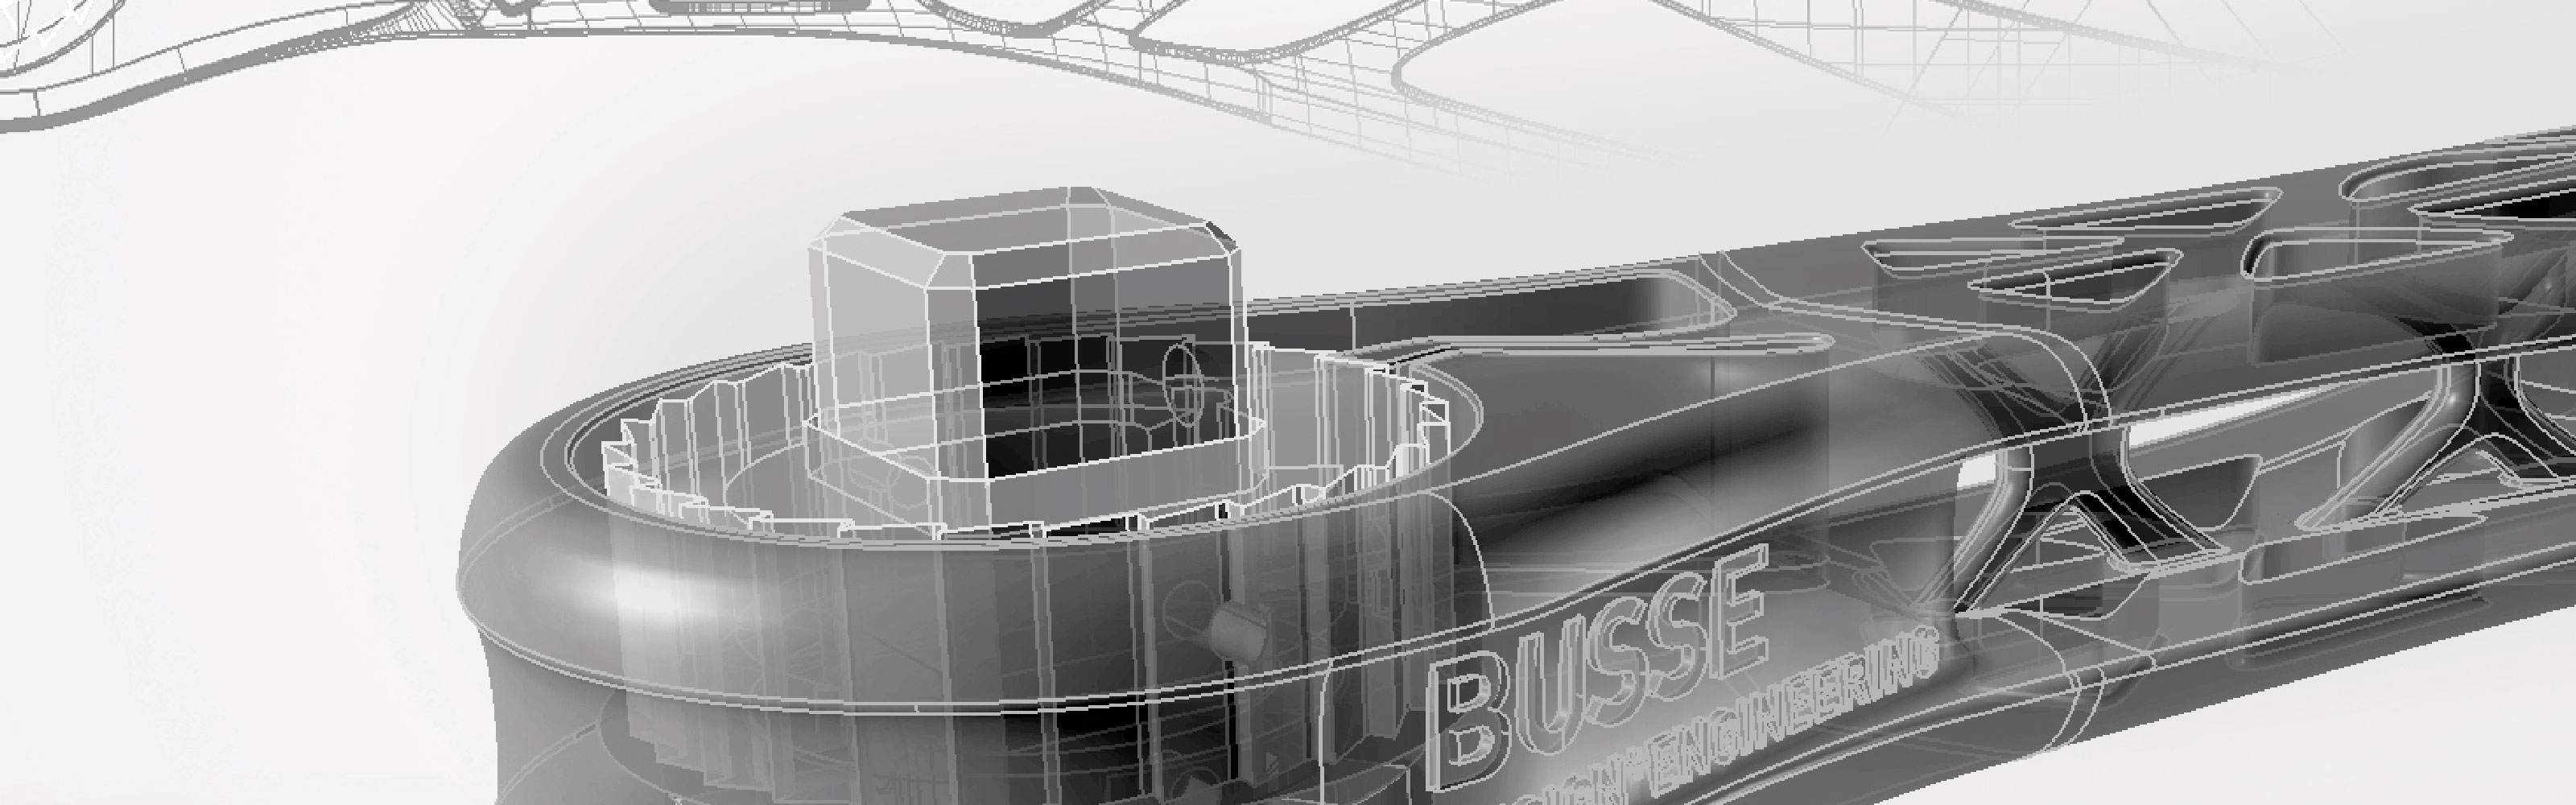 Graphic representation of a technical construction with transparent views of a mechanical component, labeled Busse Design Engineering.